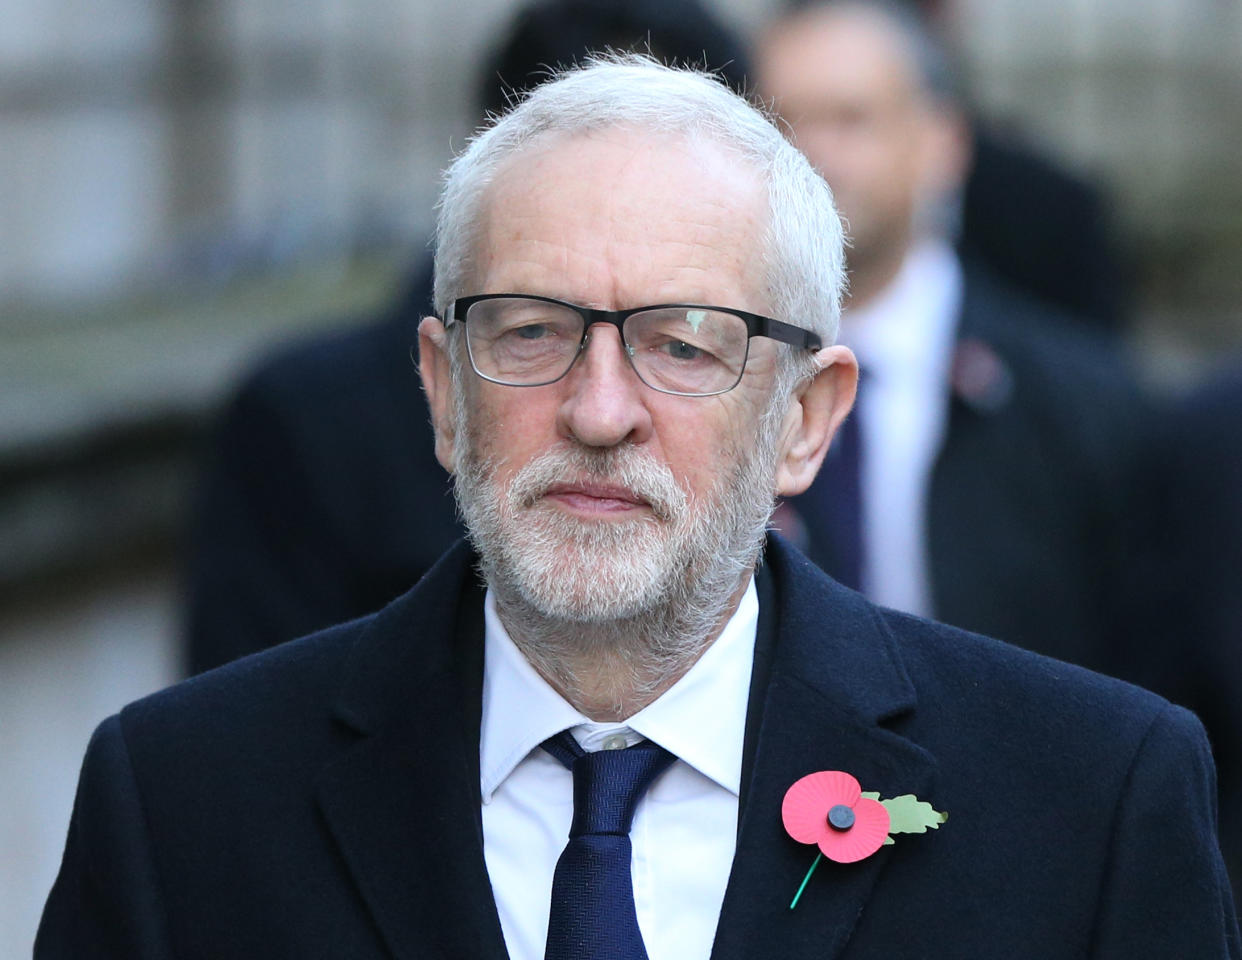 Labour Party leader Jeremy Corbyn in Downing Street arriving for the Remembrance Sunday service at the Cenotaph memorial in Whitehall, central London.